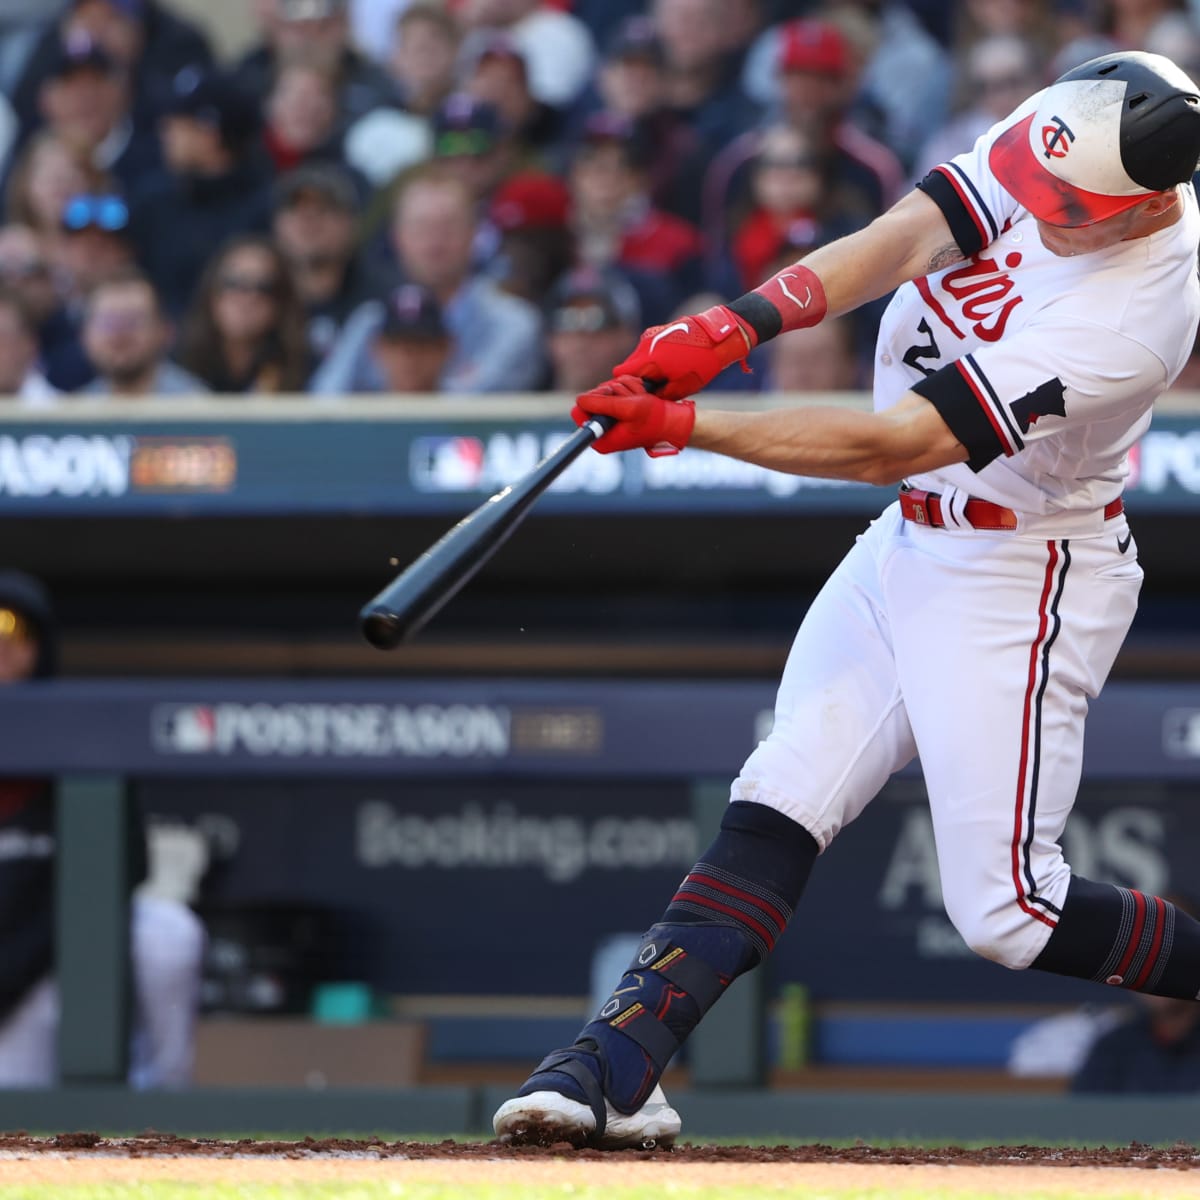 The Minnesota Twins have cornered the market on catchers – Twin Cities